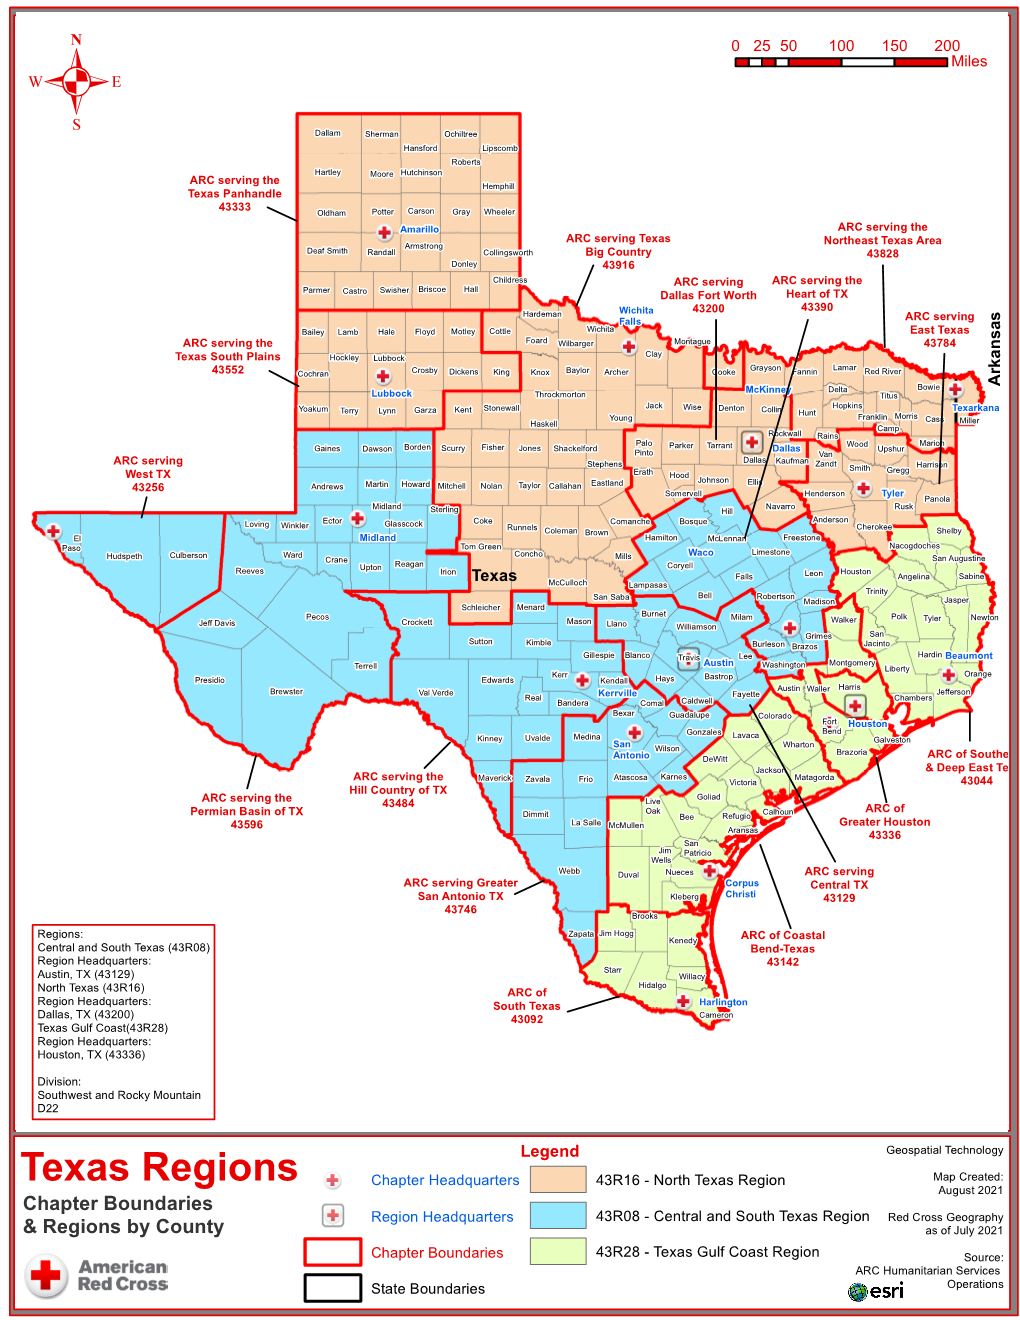 Texas Regions August 2021 Chapter Boundaries Region Headquarters 43R08 - Central and South Texas Region Red Cross Geography & Regions by County As of July 2021